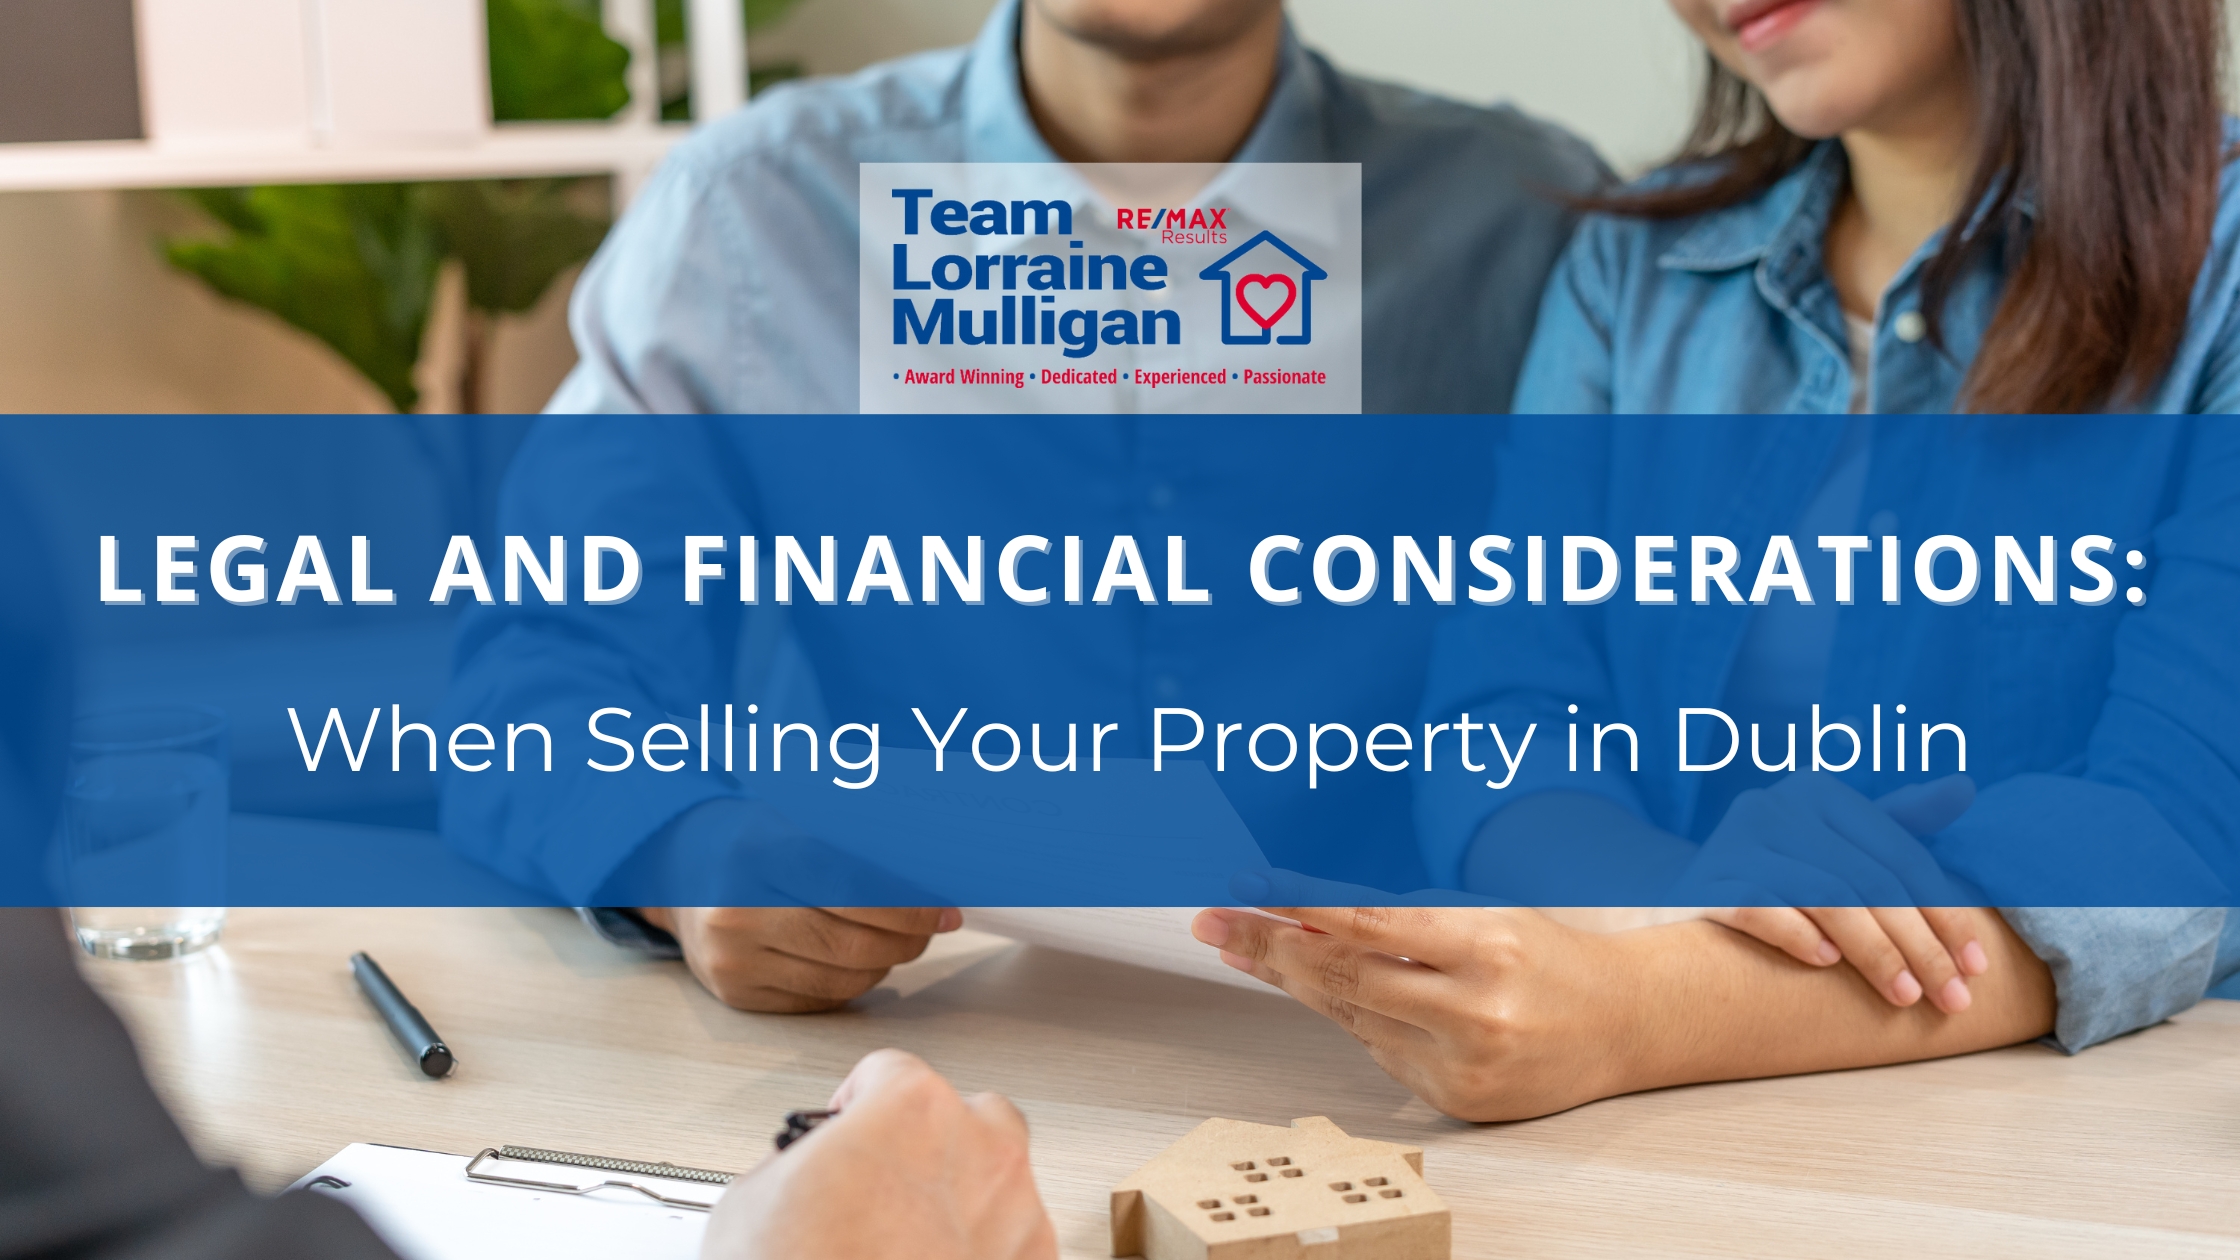 Legal and Financial Considerations When Selling Your Property in Dublin